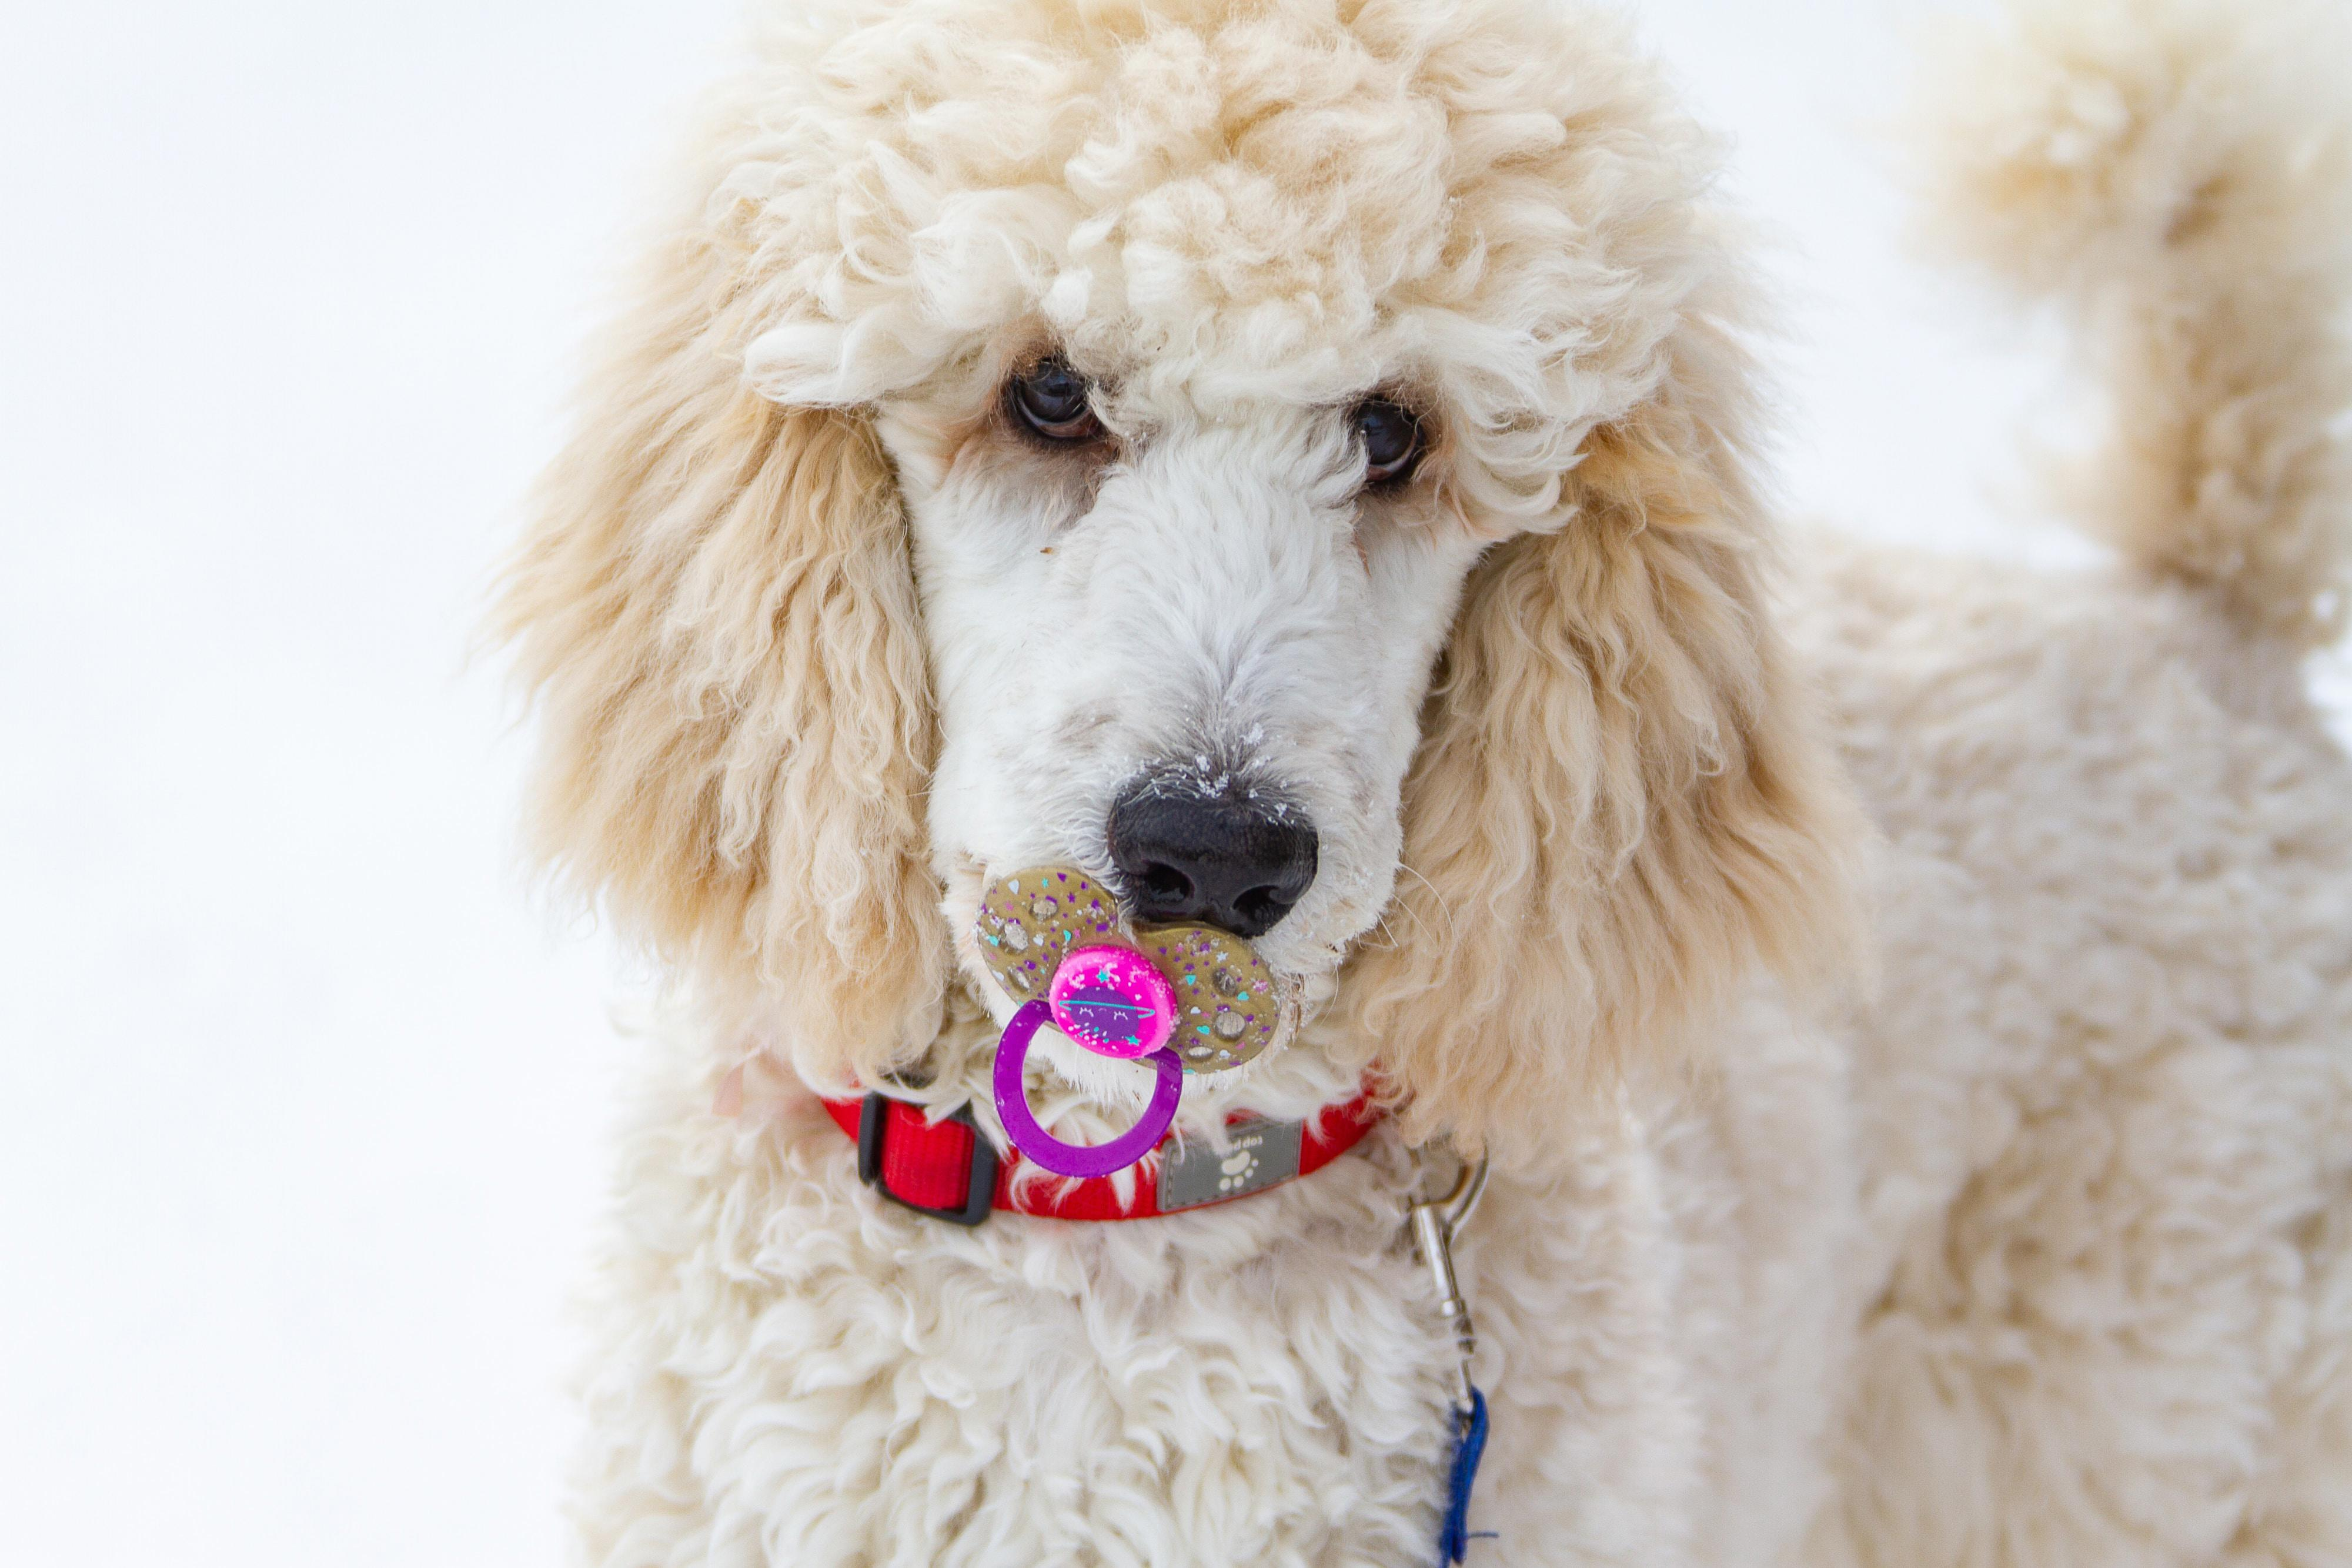 Training Poodles for Tricks and Show Performances - The Possibilities are Endless!